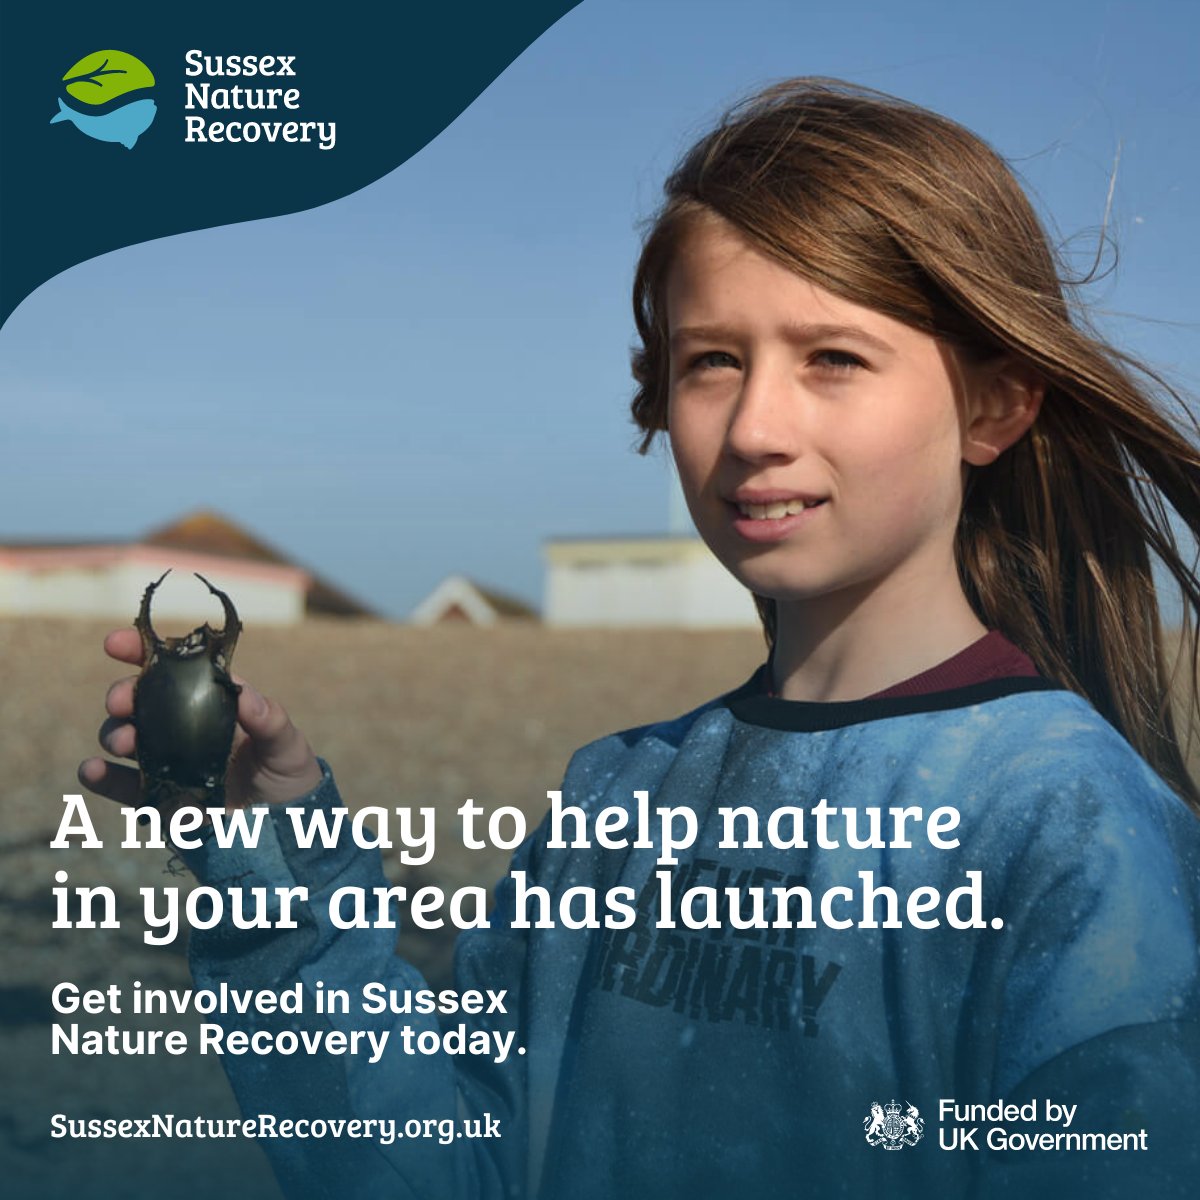 Want to help nature locally? We’re supporting East & West Sussex County Councils to develop Local Nature Recovery Strategies for East & West Sussex and Brighton & Hove – and so can you! Find out more at SussexNatureRecovery.org.uk #SussexNatureRecovery #SussexLNRS #HelpSussexNature